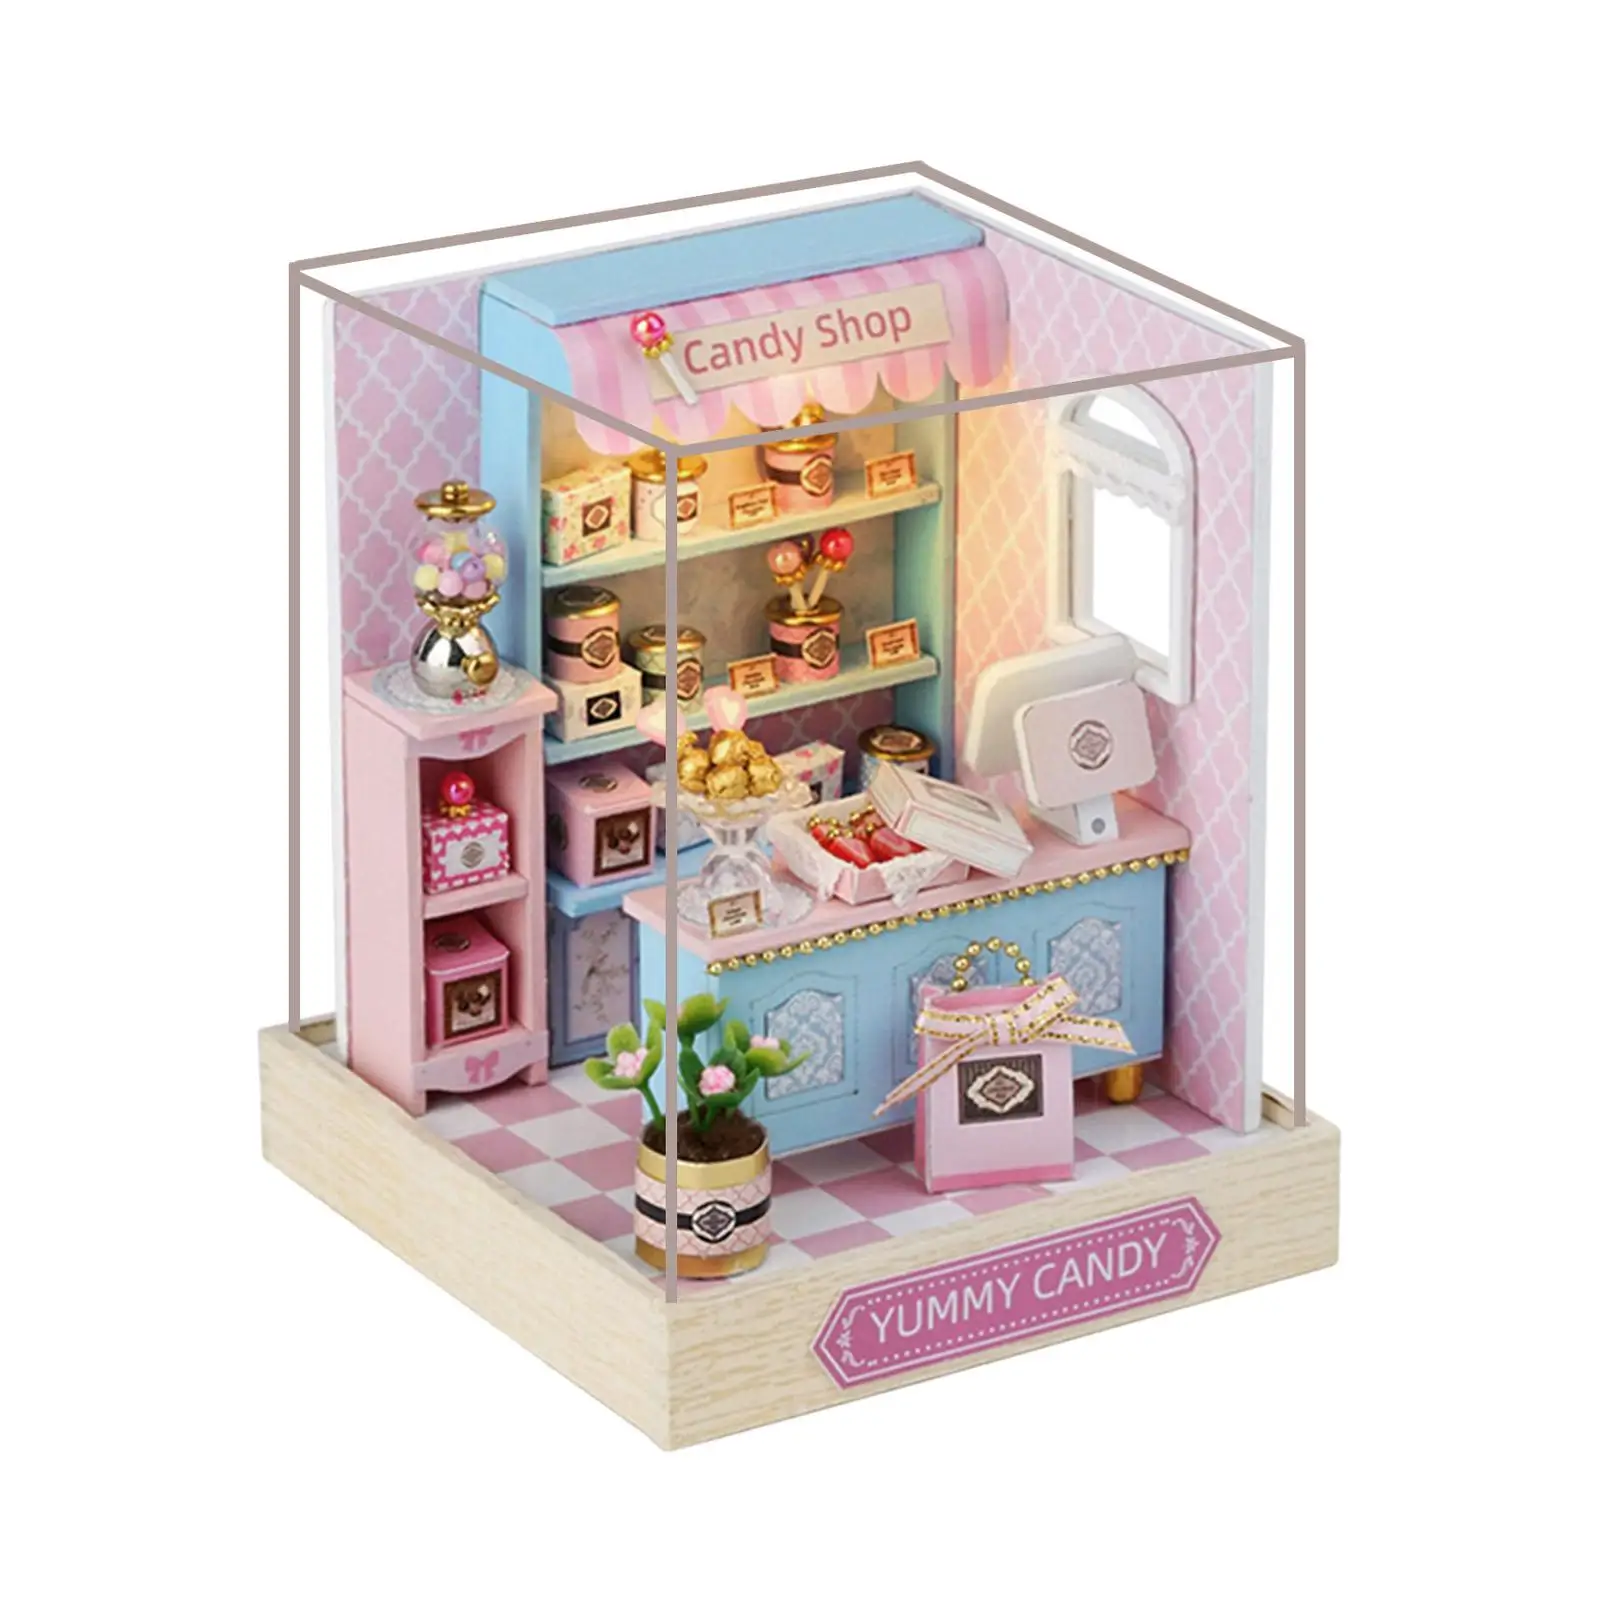 DIY Wooden Miniature Dollhouse DIY Crafts Home Decor with Lights Decorations 3D Puzzles with Funiture for Friends Adults Kids